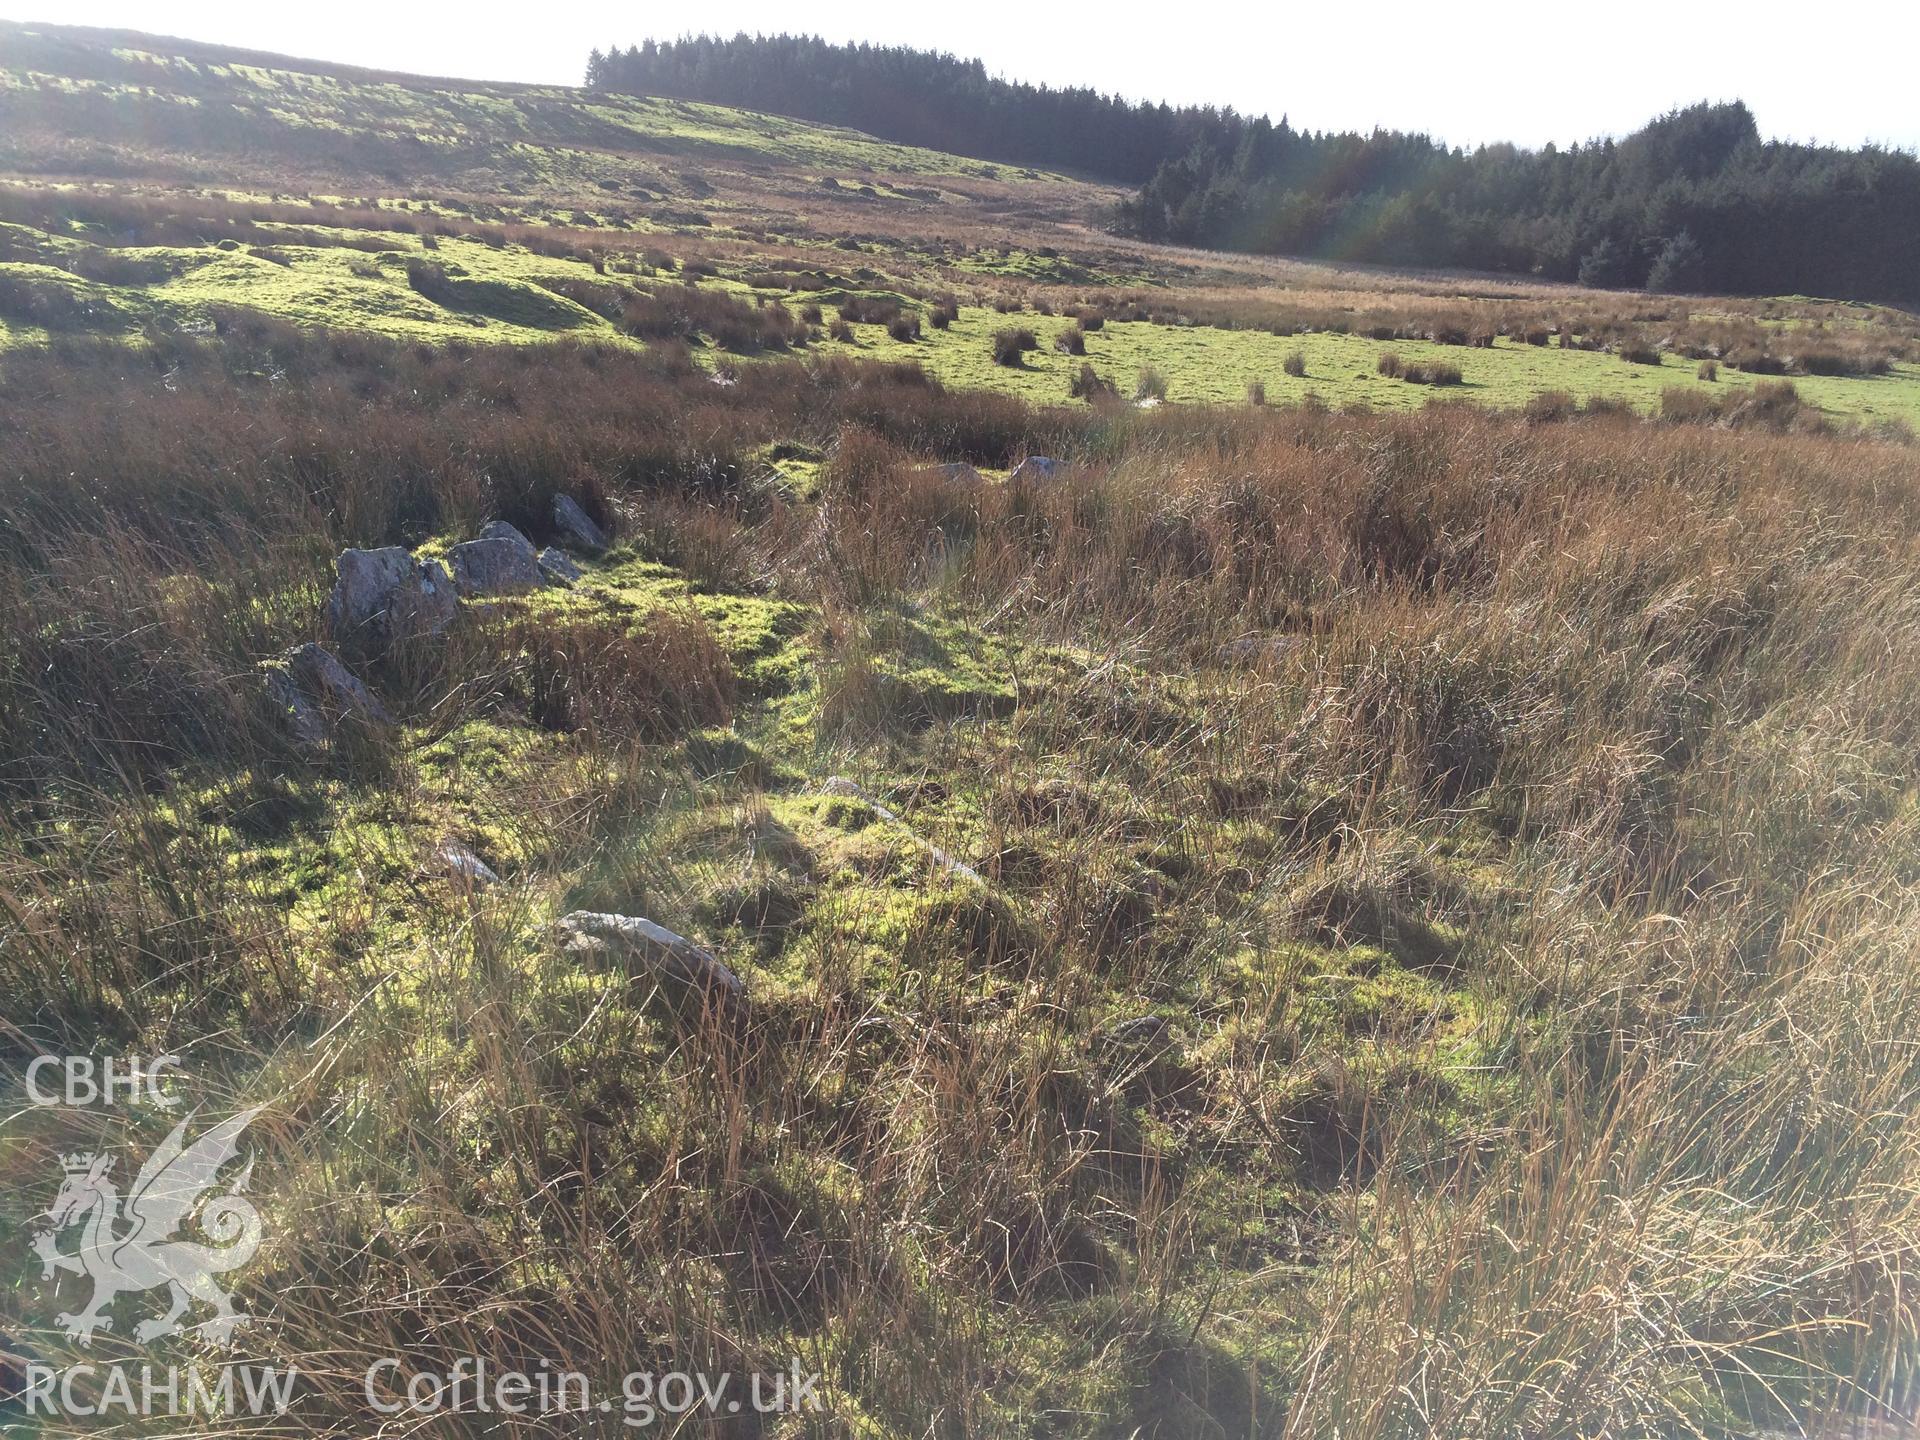 Colour photo showing Carn Caca cairn, taken by Paul R. Davis, 30th January 2016.